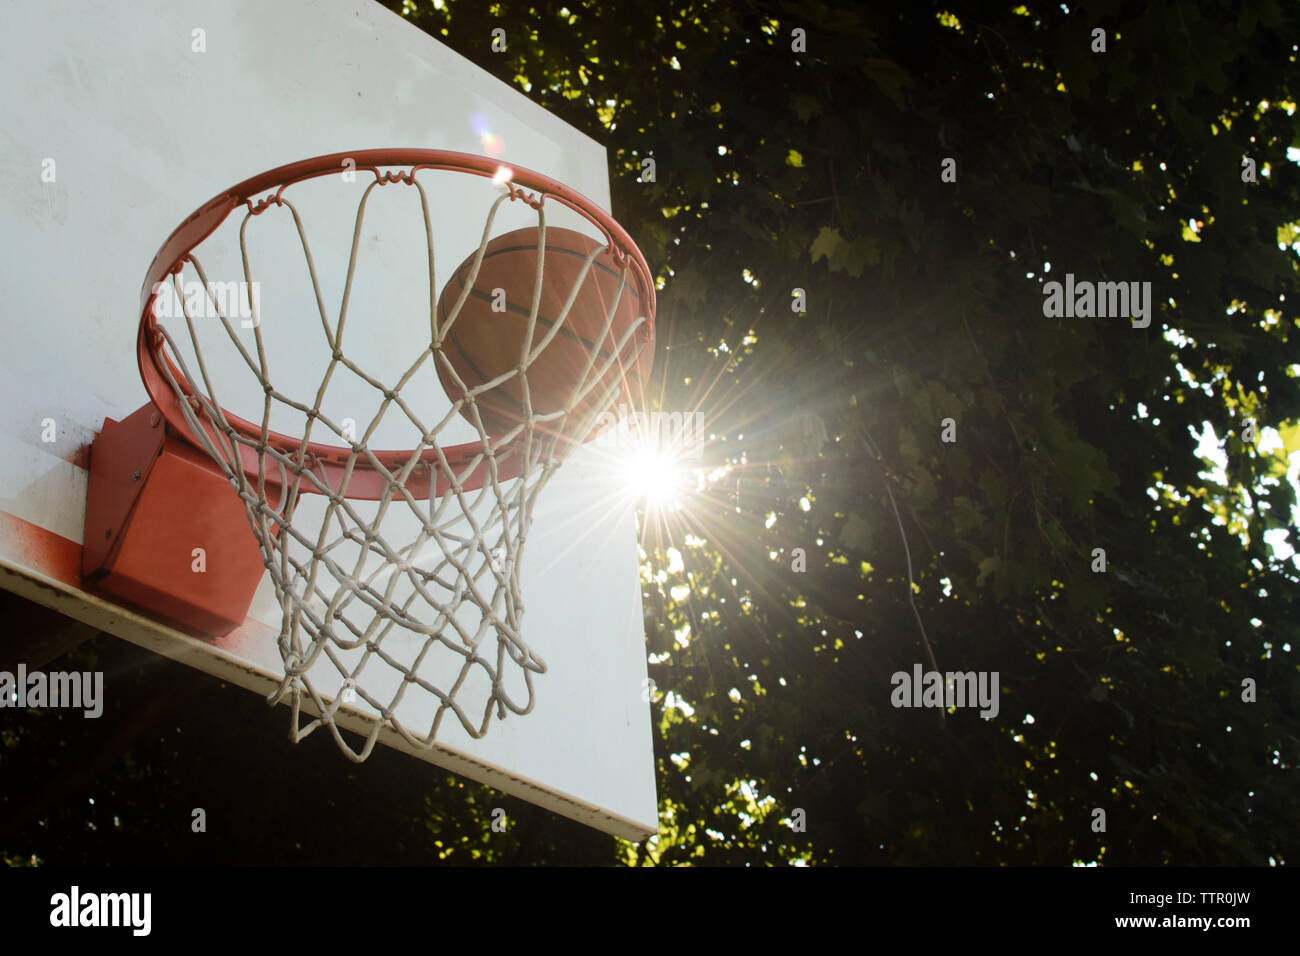 Low angle view of basketball in hoop Stock Photo